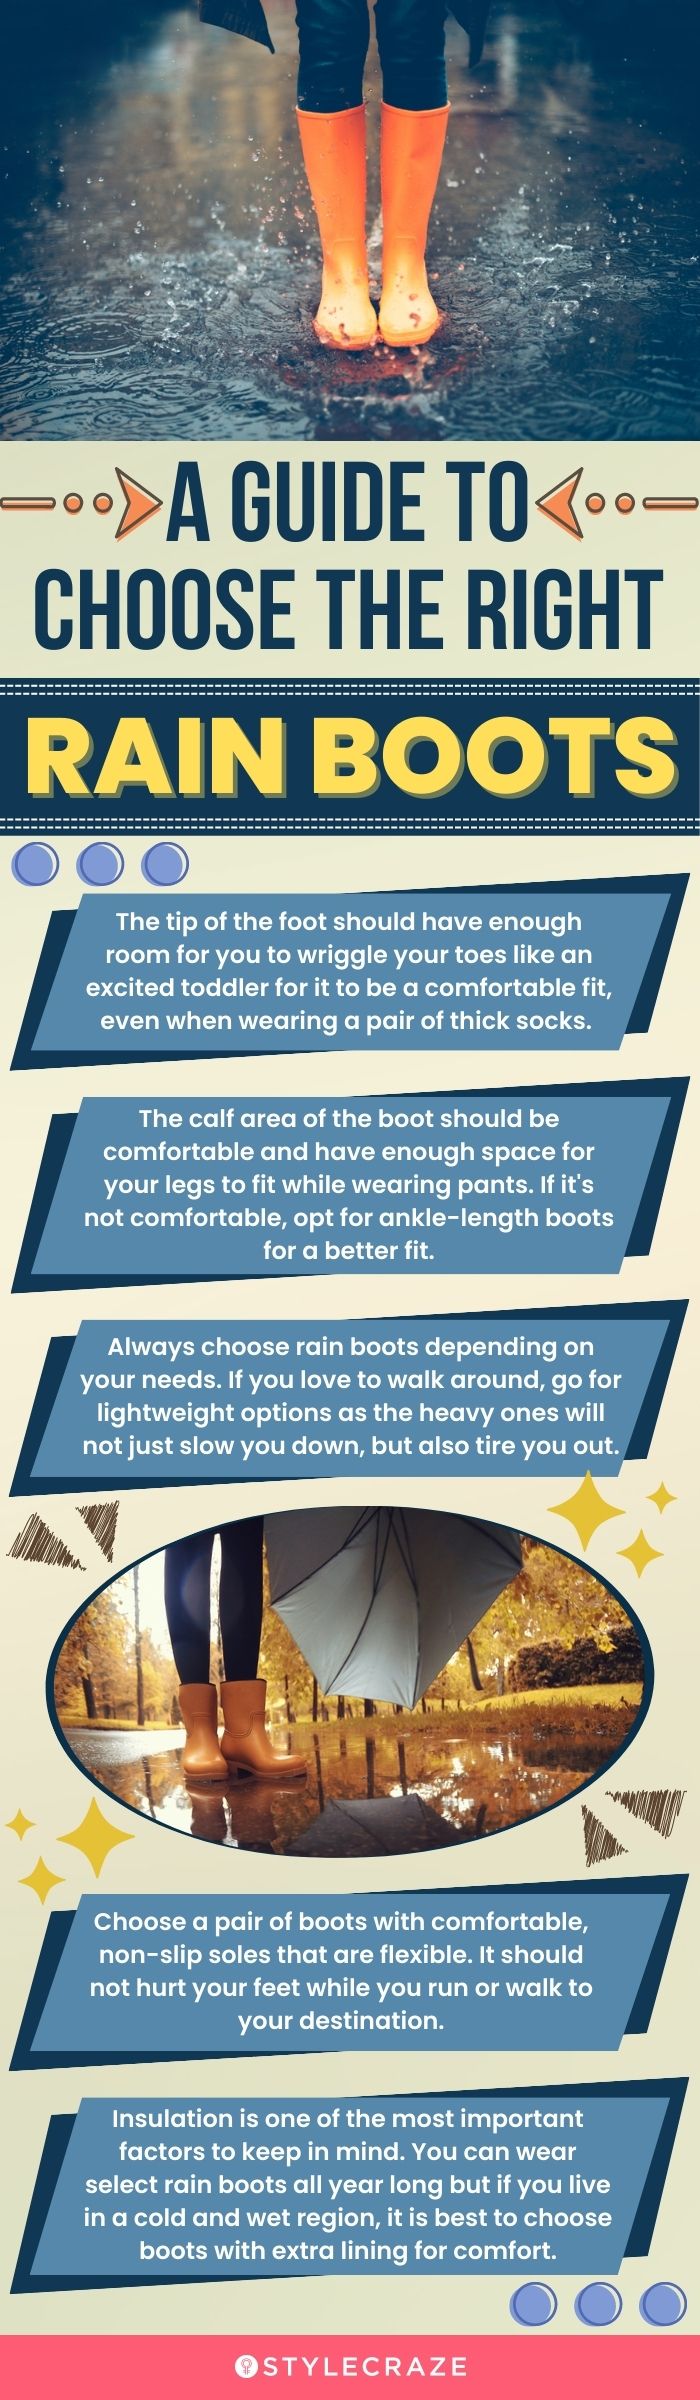  A Guide To Choose The Right Rain Boots (infographic)